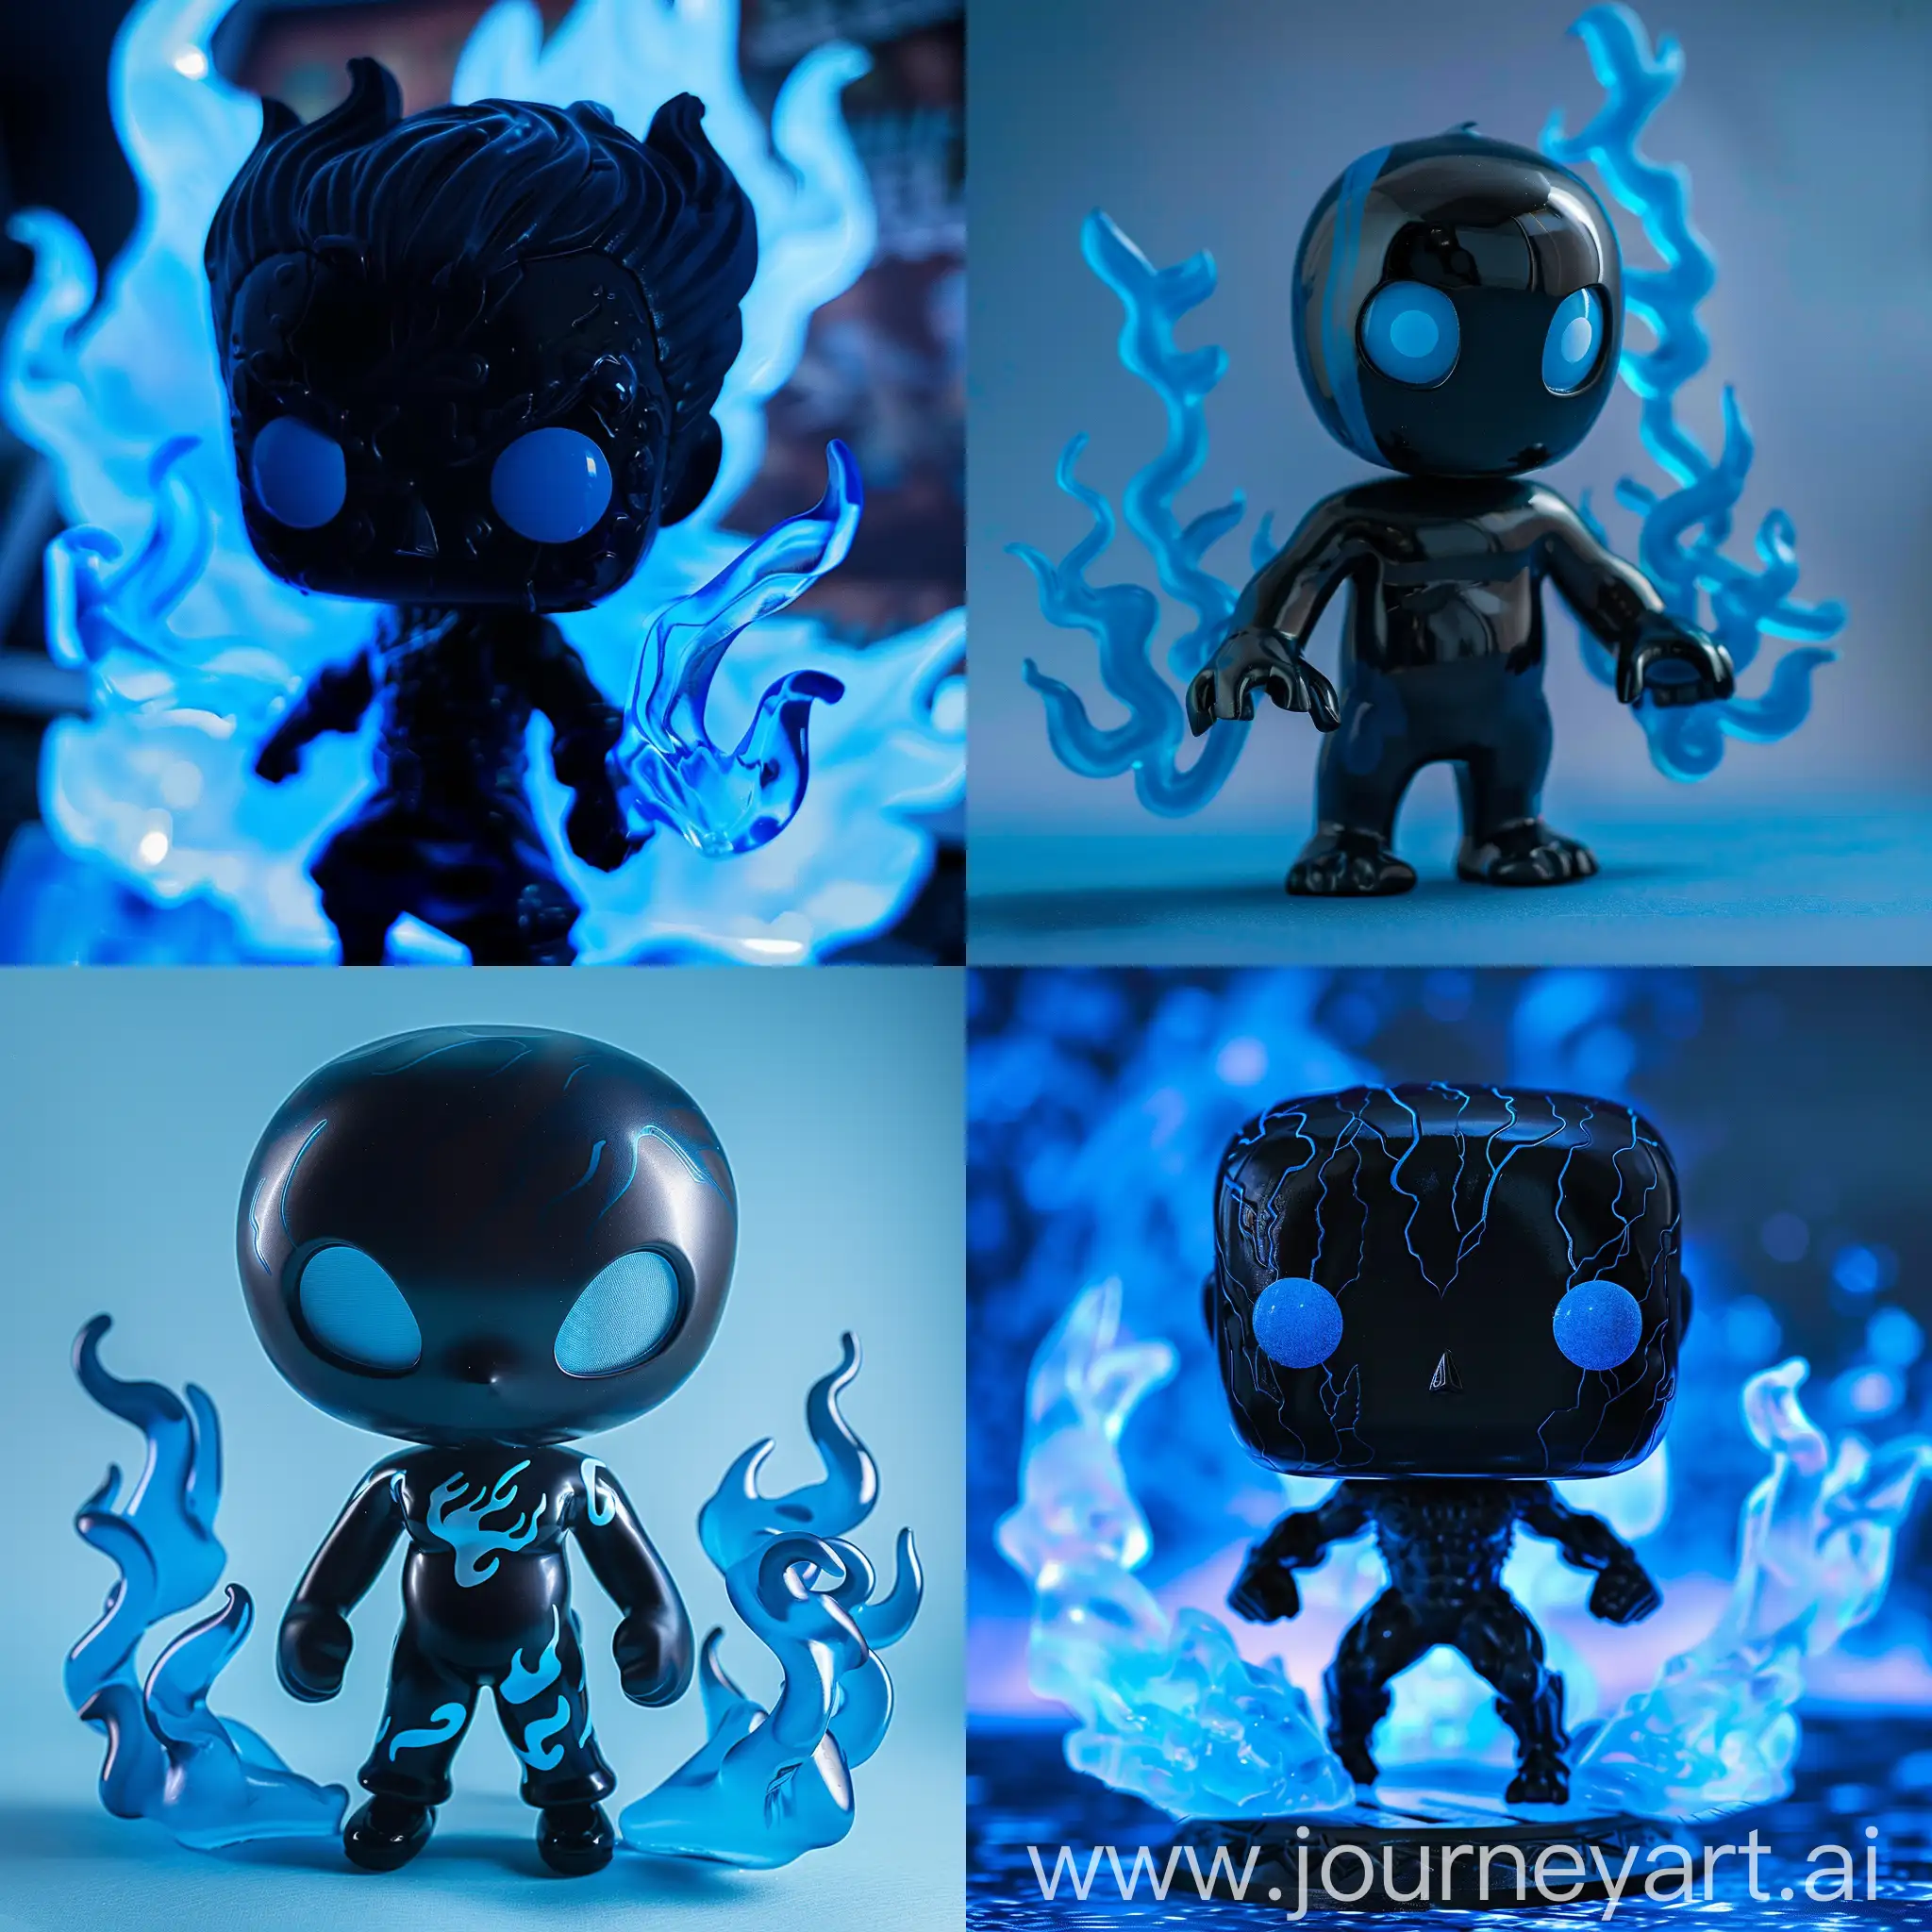 Mystical-Black-Figure-with-Blue-Flames-Eyes